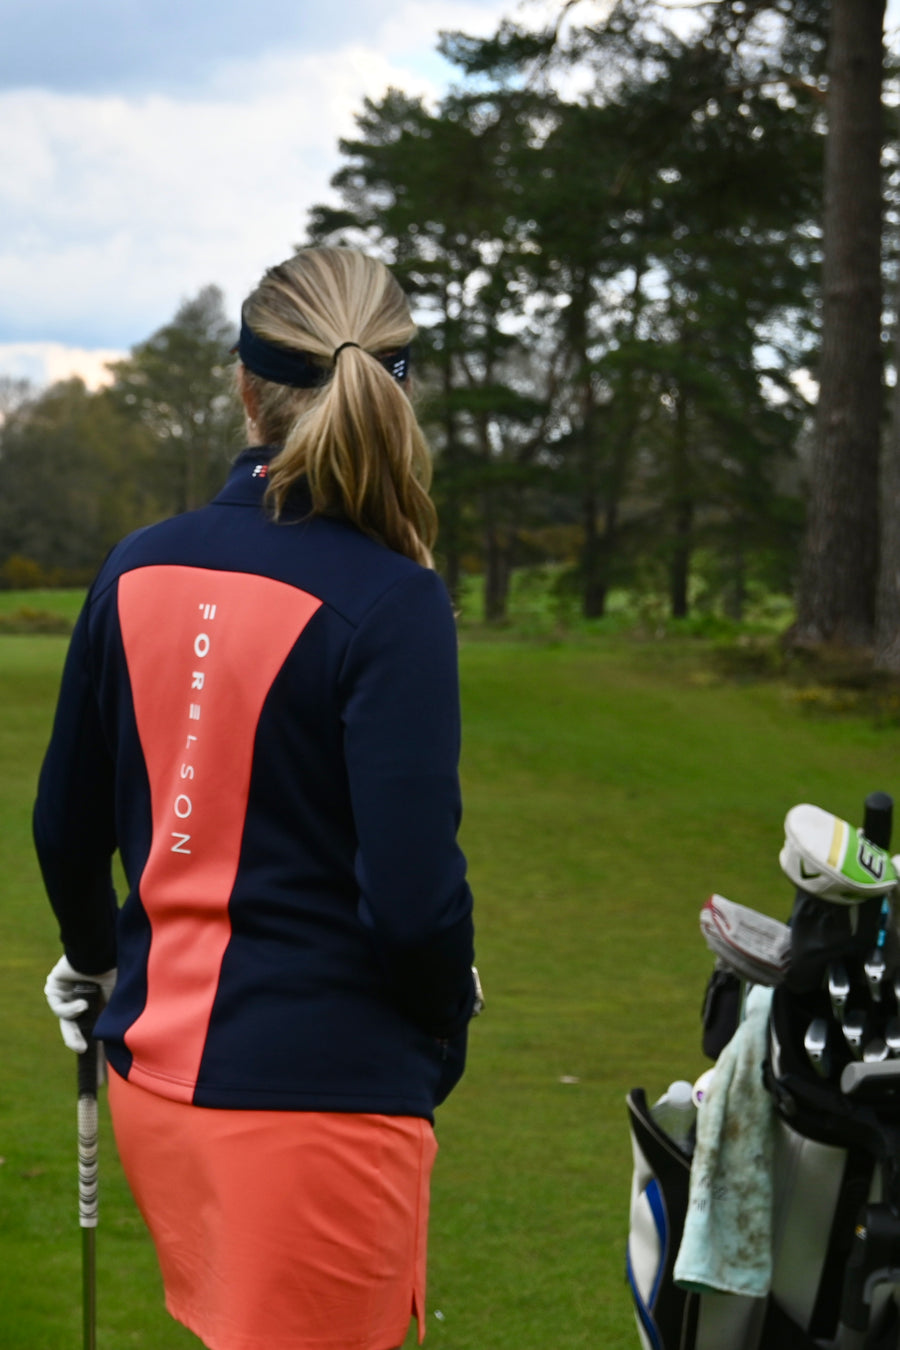 Women's navy and orange zip up golf jacket. Soft fabric that will stretch, allowing movement.